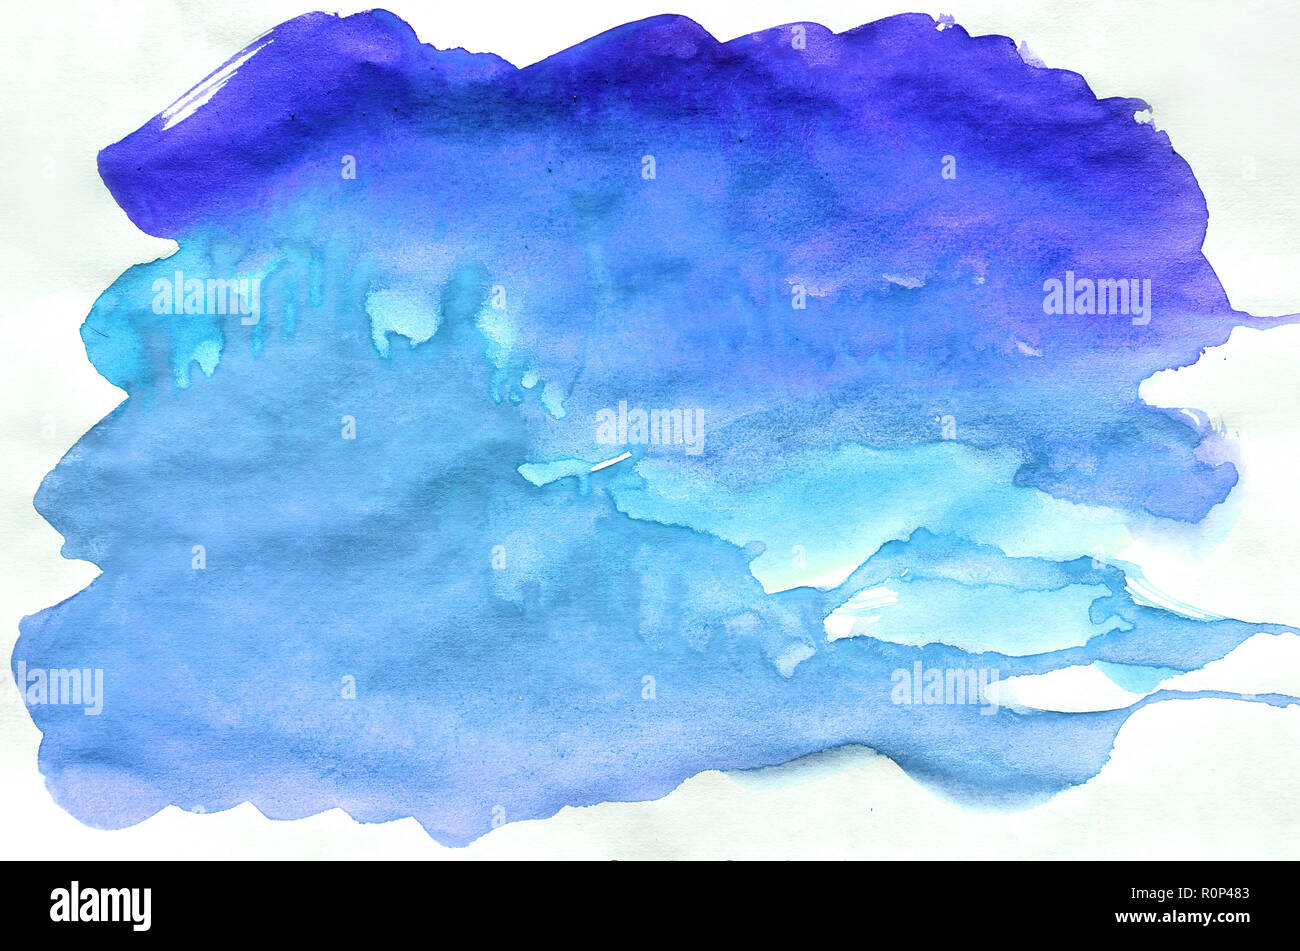 Abstract Ink Blue Aquarel Watercolor Splash Hand Paint On White